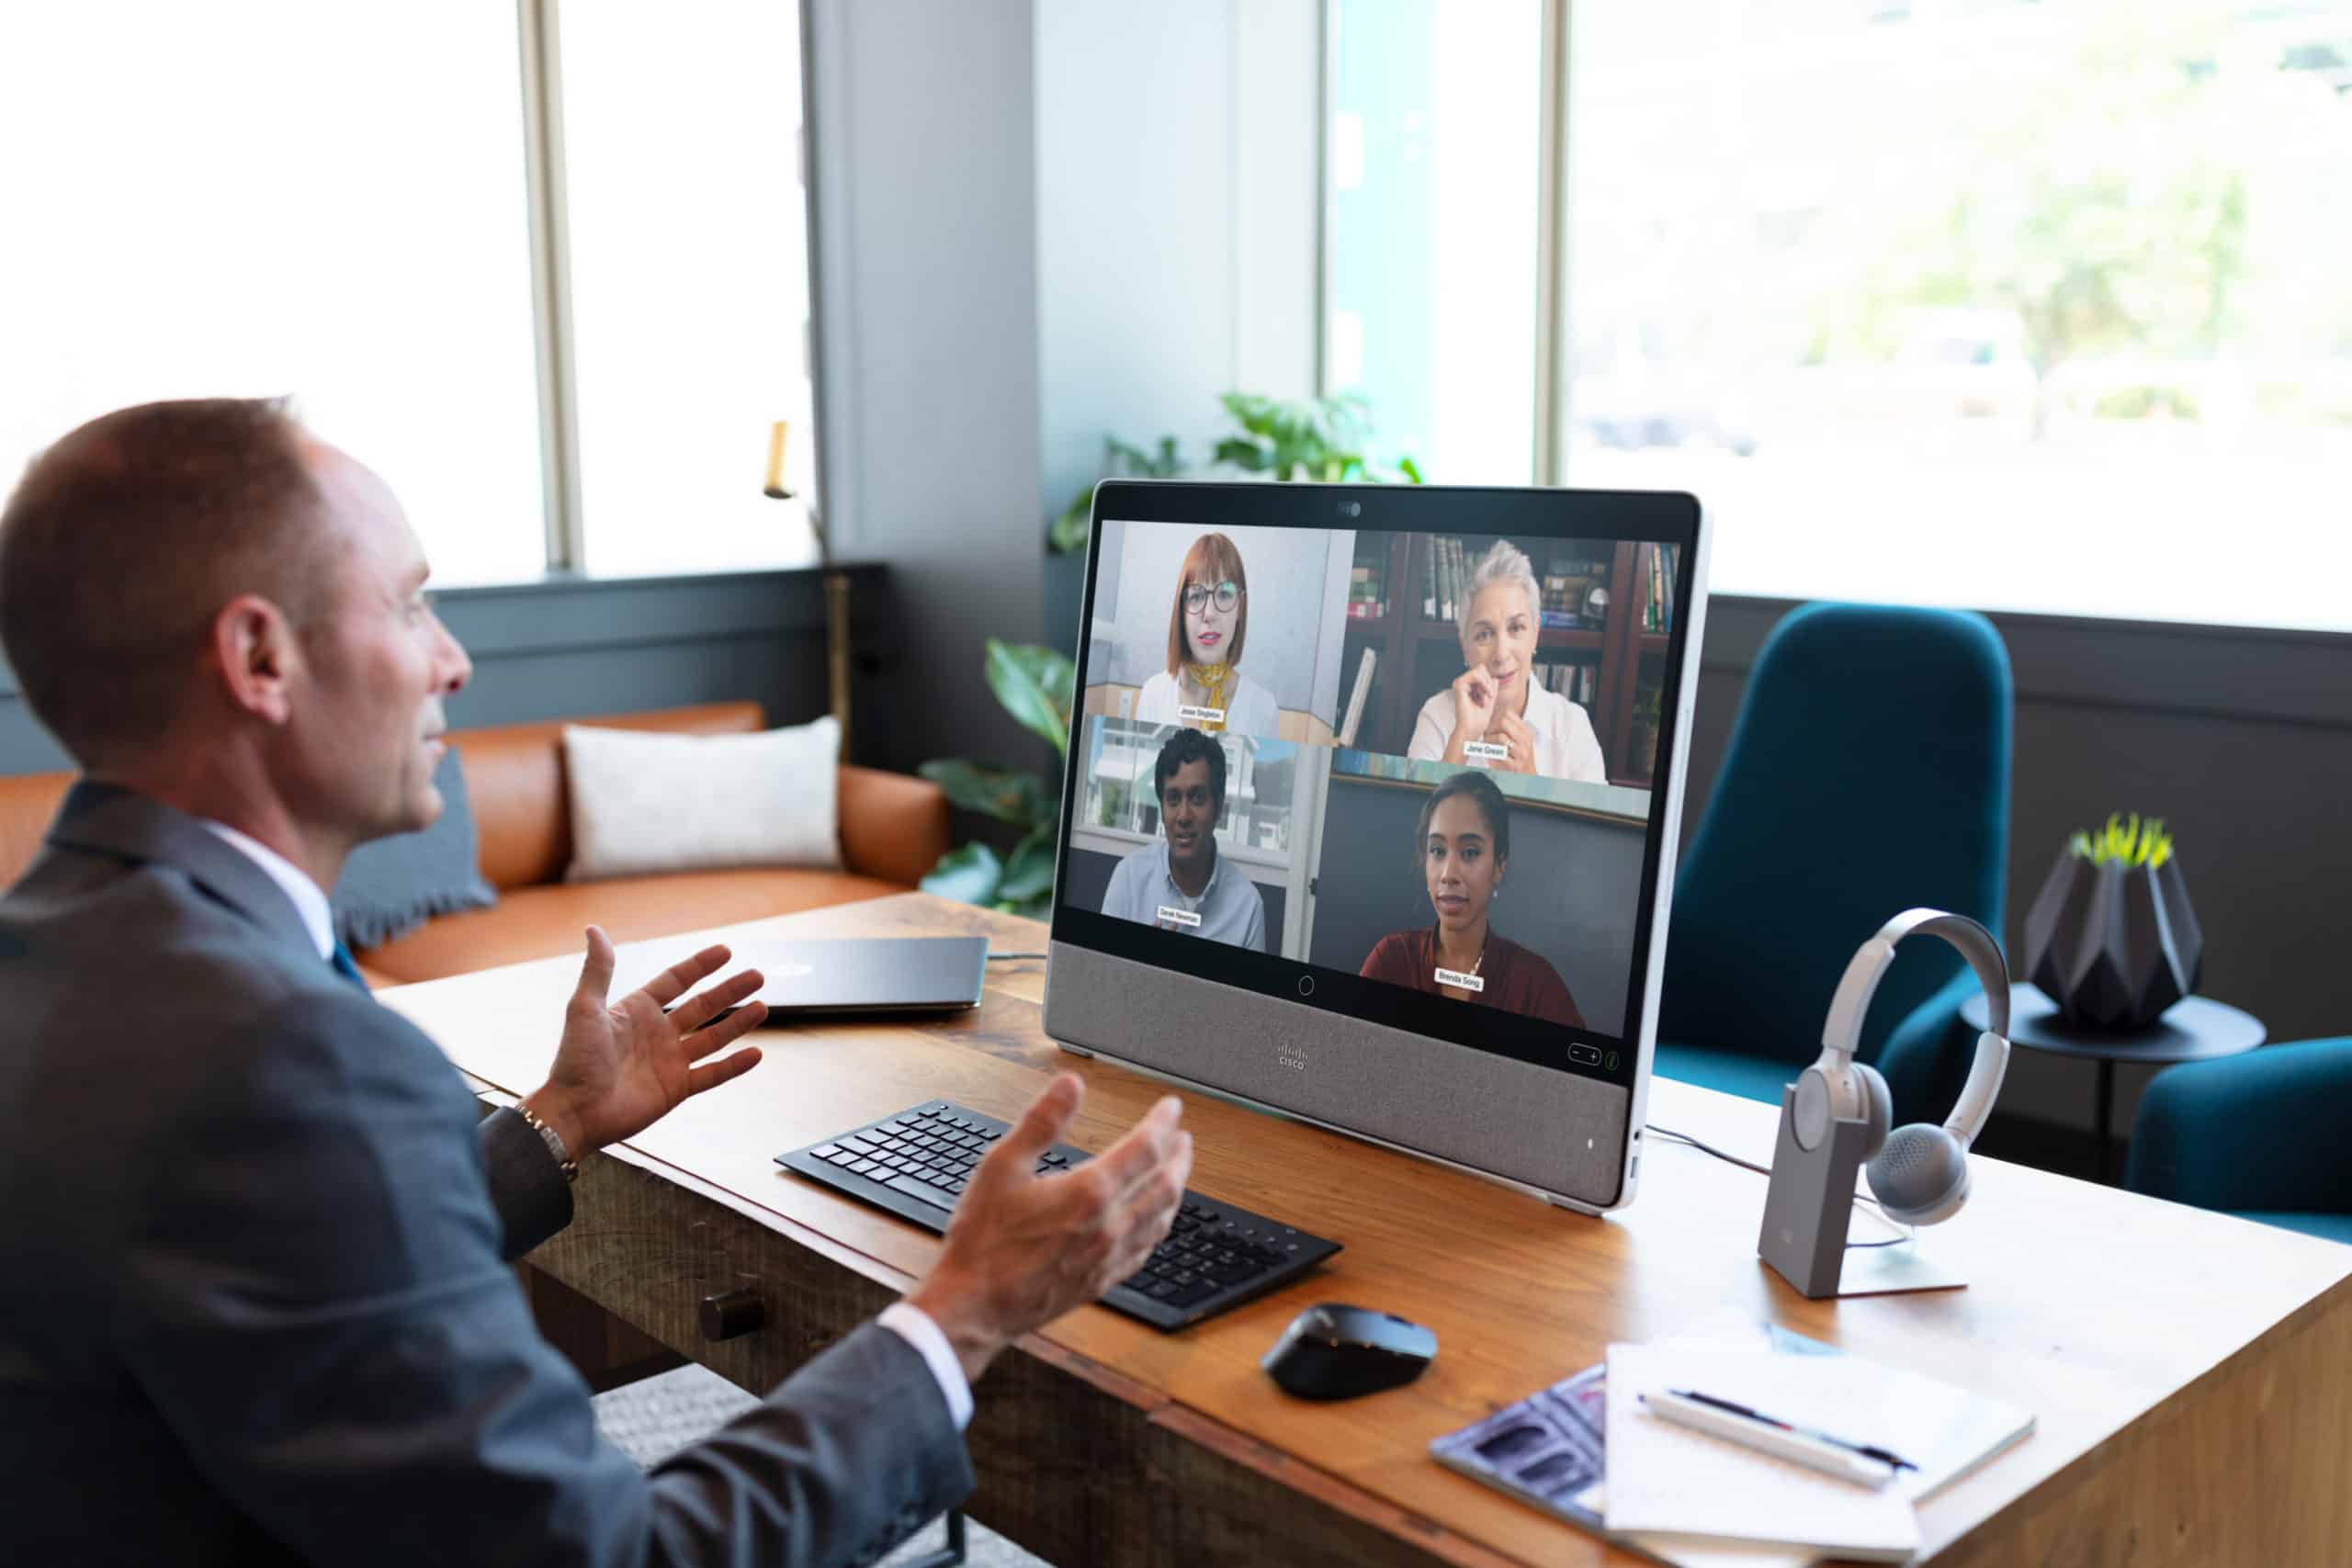 Executive participating in an virtual meeting